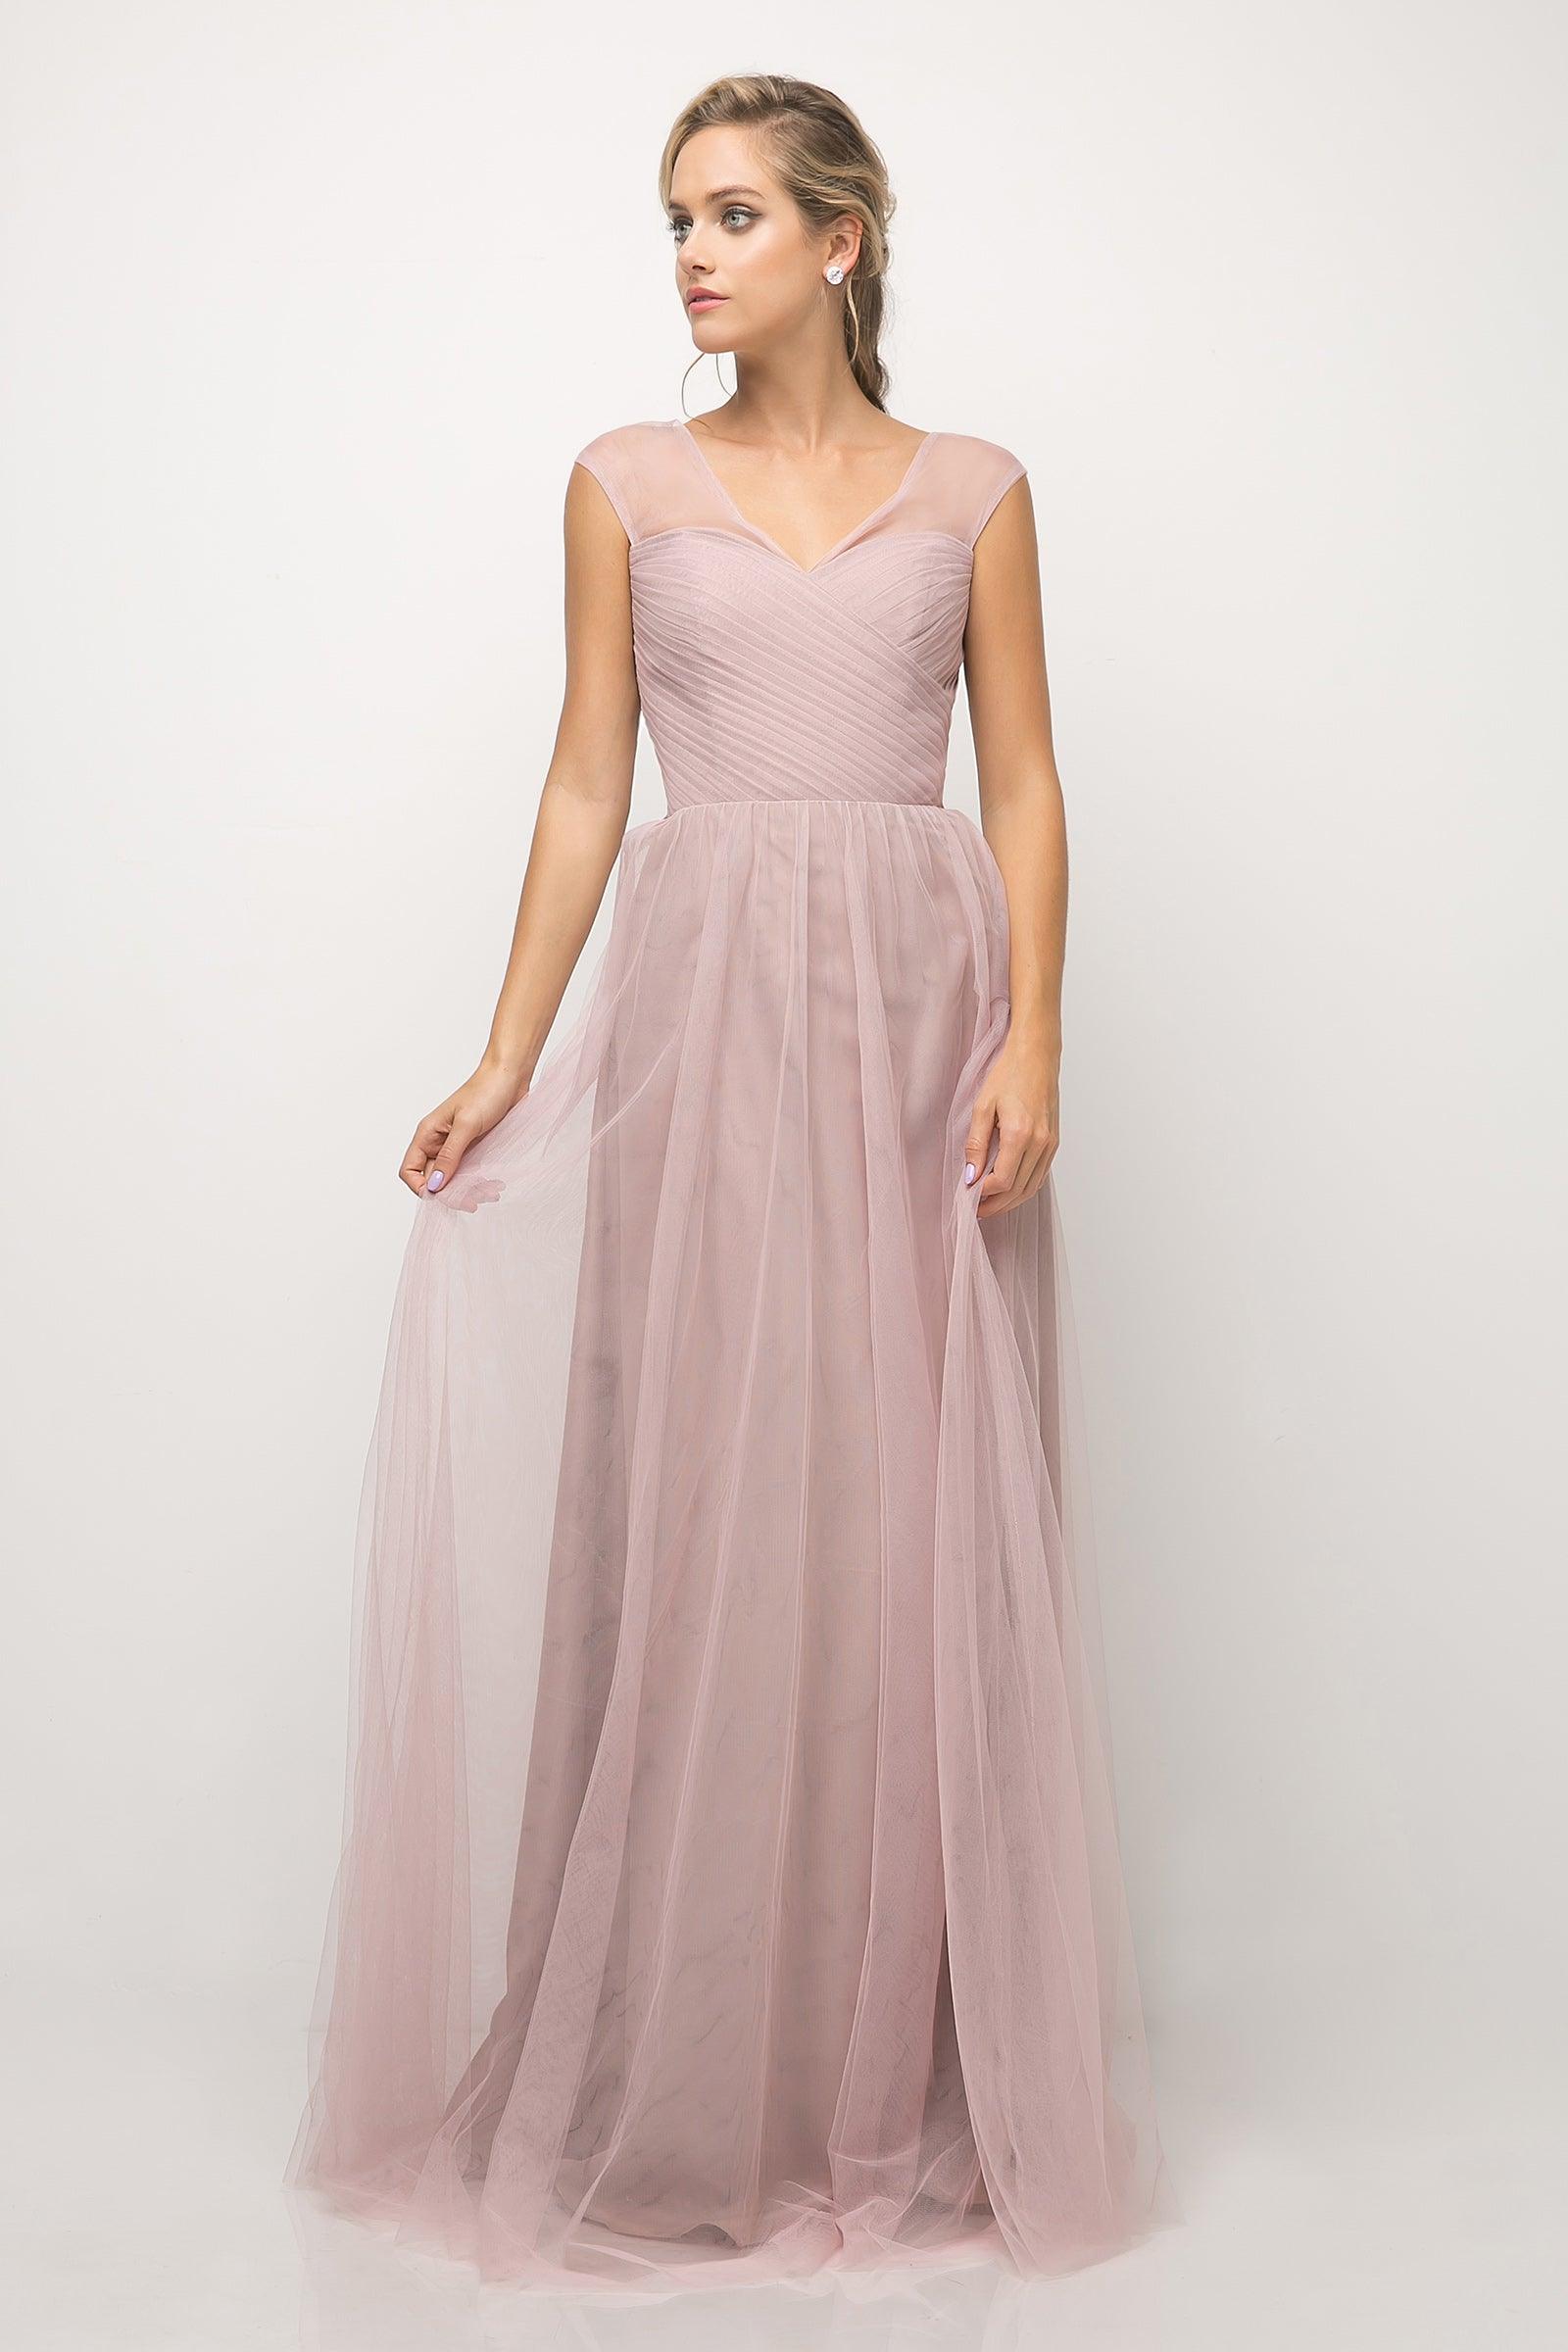 Long V Neck Prom Dress Bridesmaid Gown - The Dress Outlet